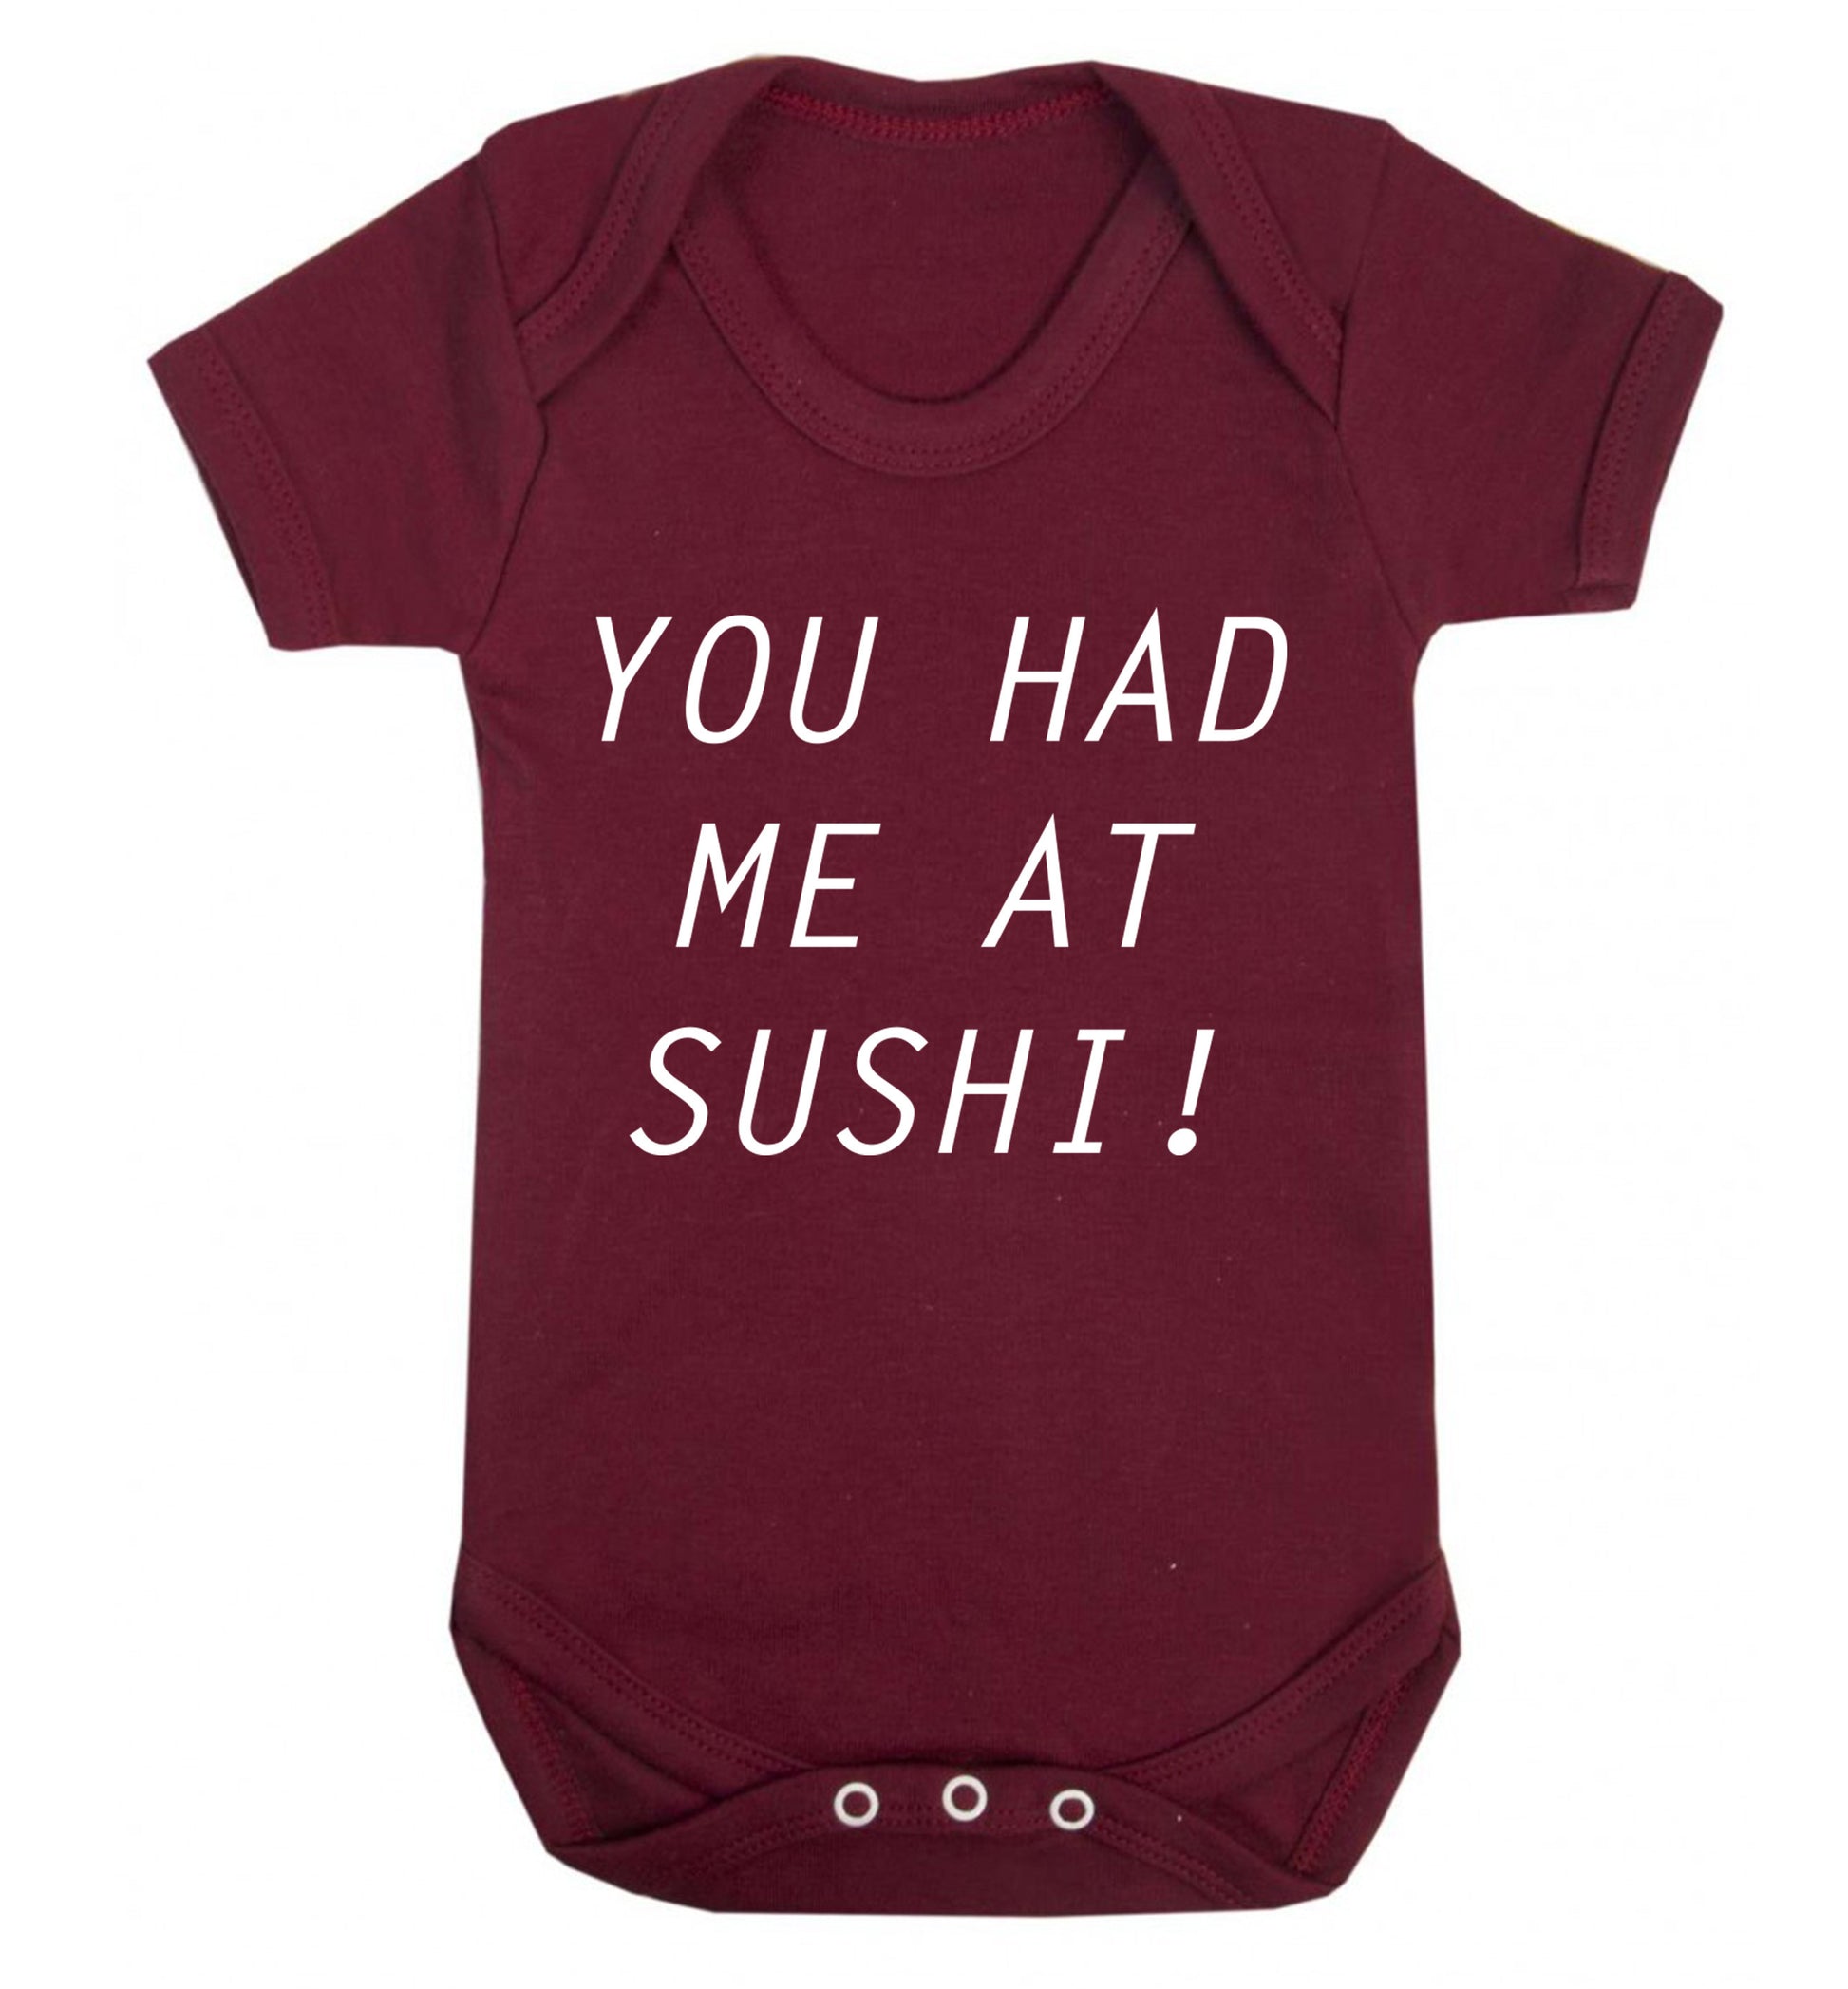 You had me at sushi Baby Vest maroon 18-24 months